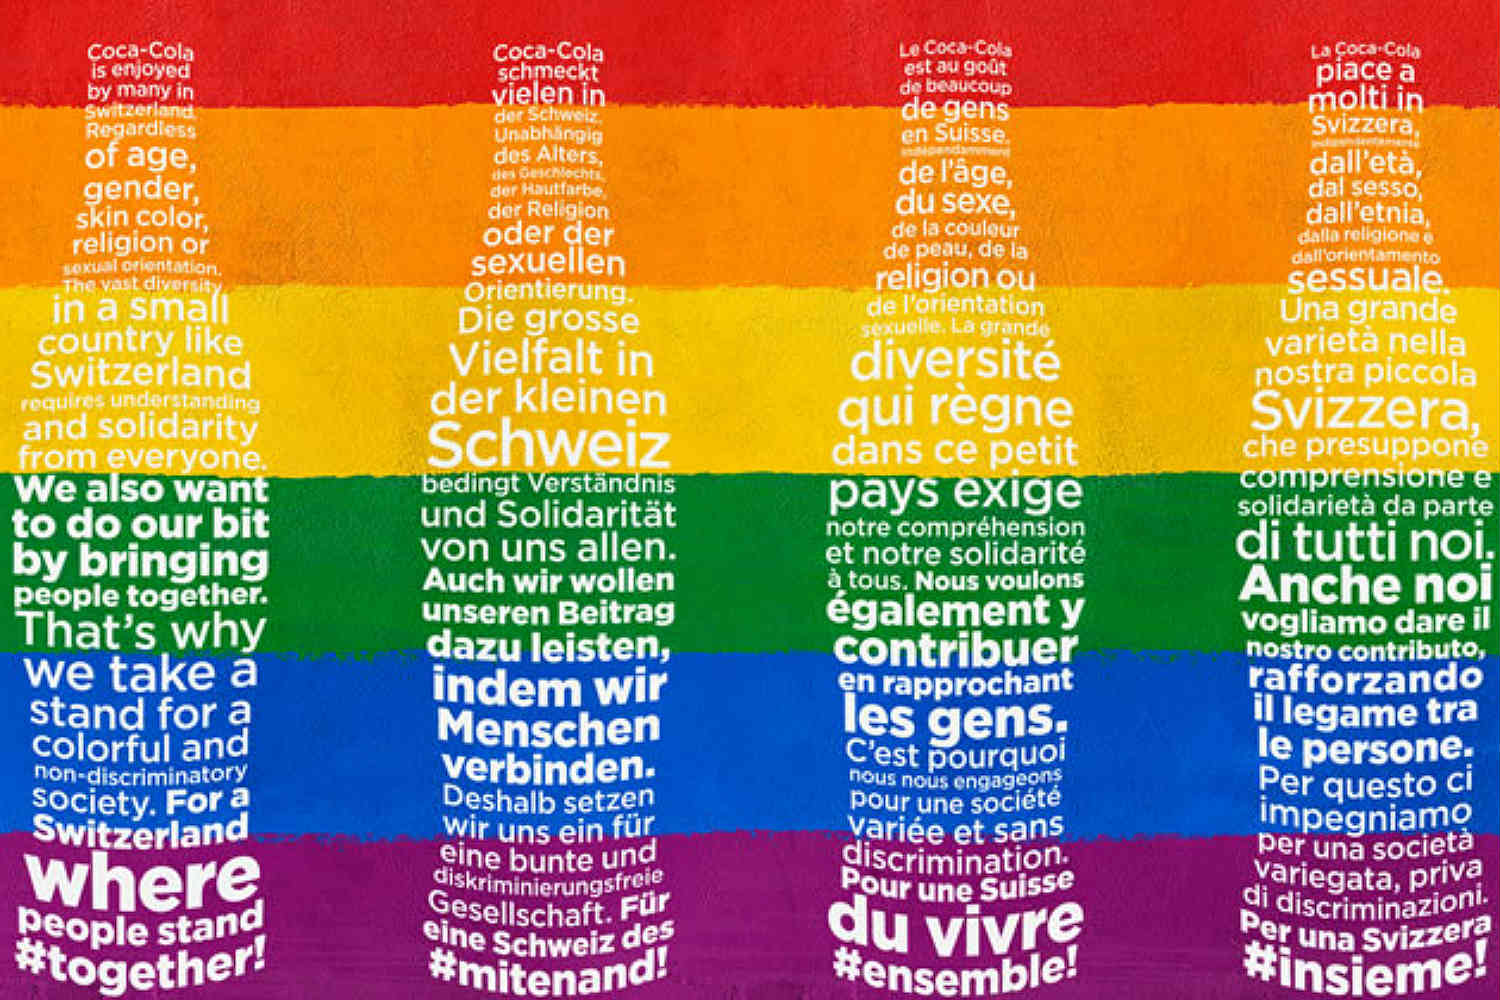 The Coca-Cola covers in four languages